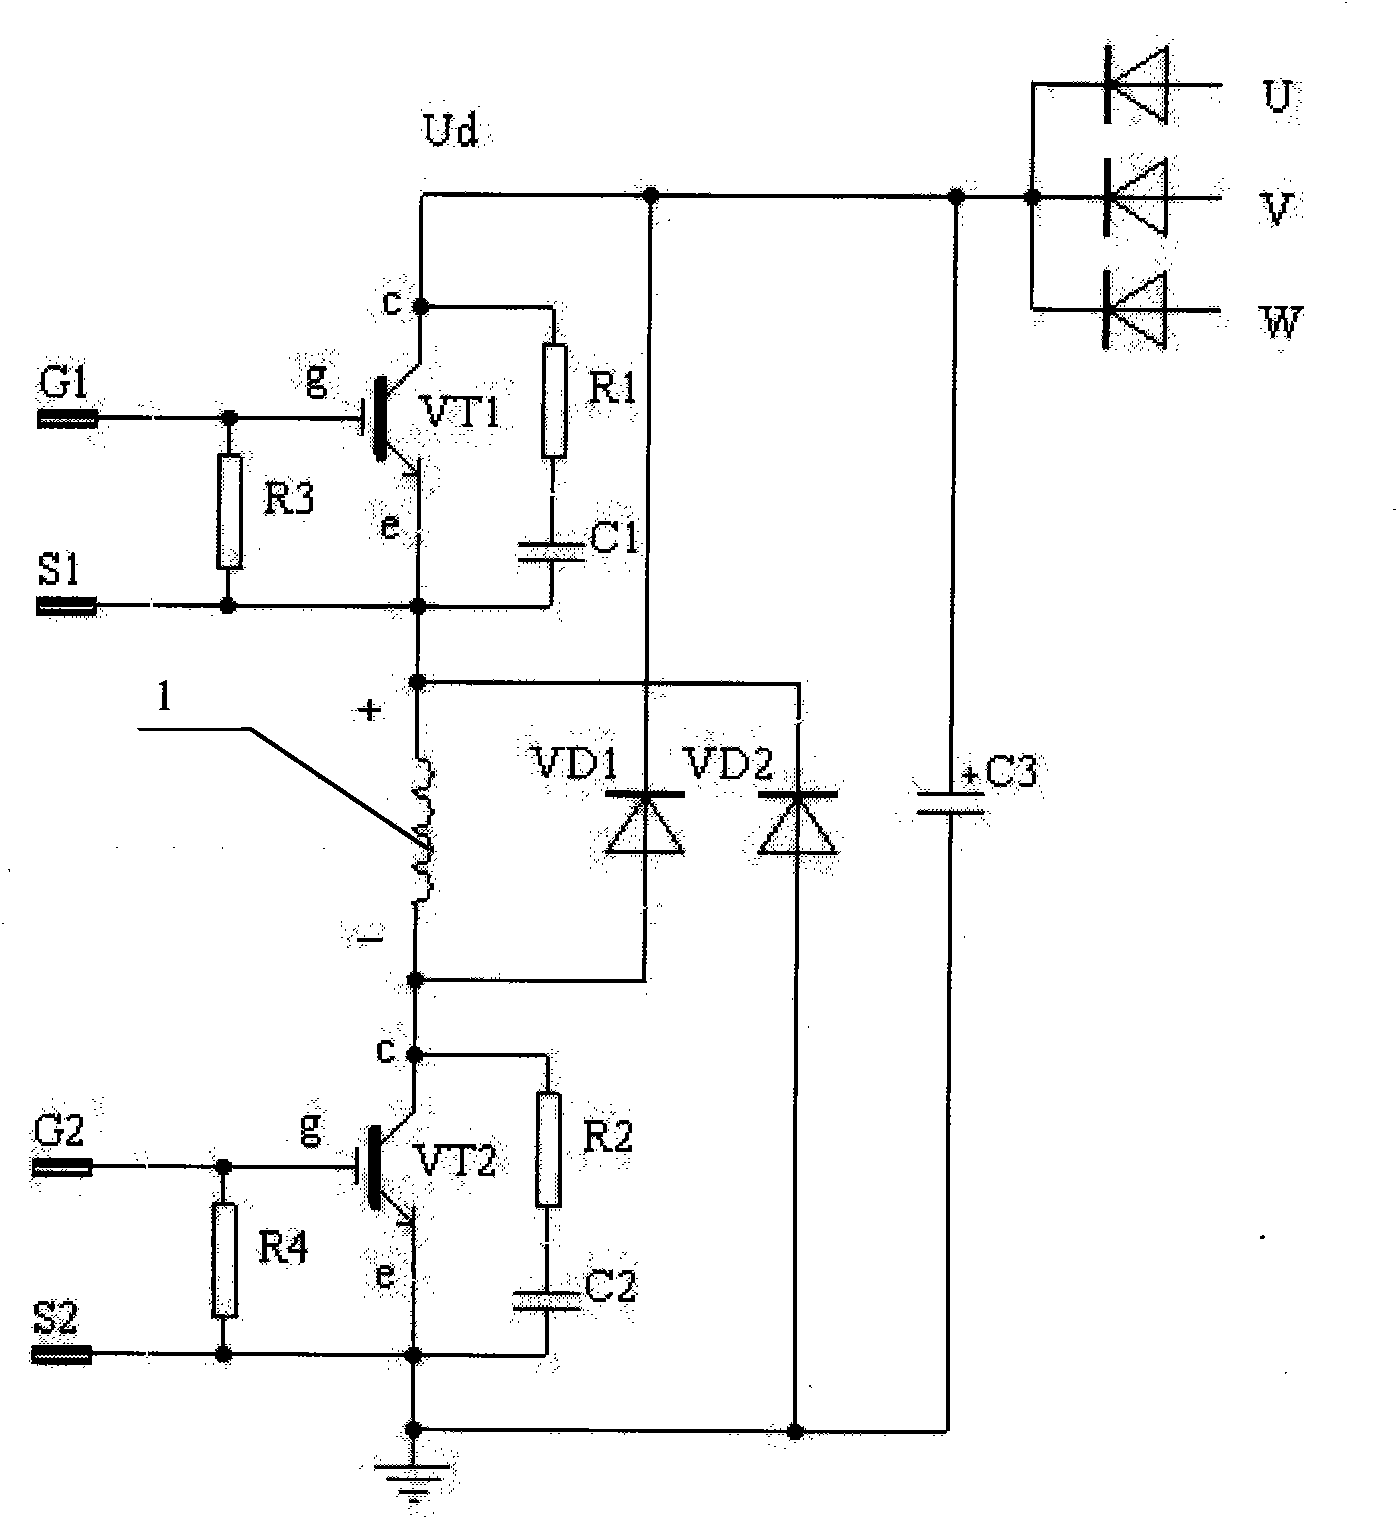 IGBT (insulated gate bipolar transistor) based drive circuit of control rod control system